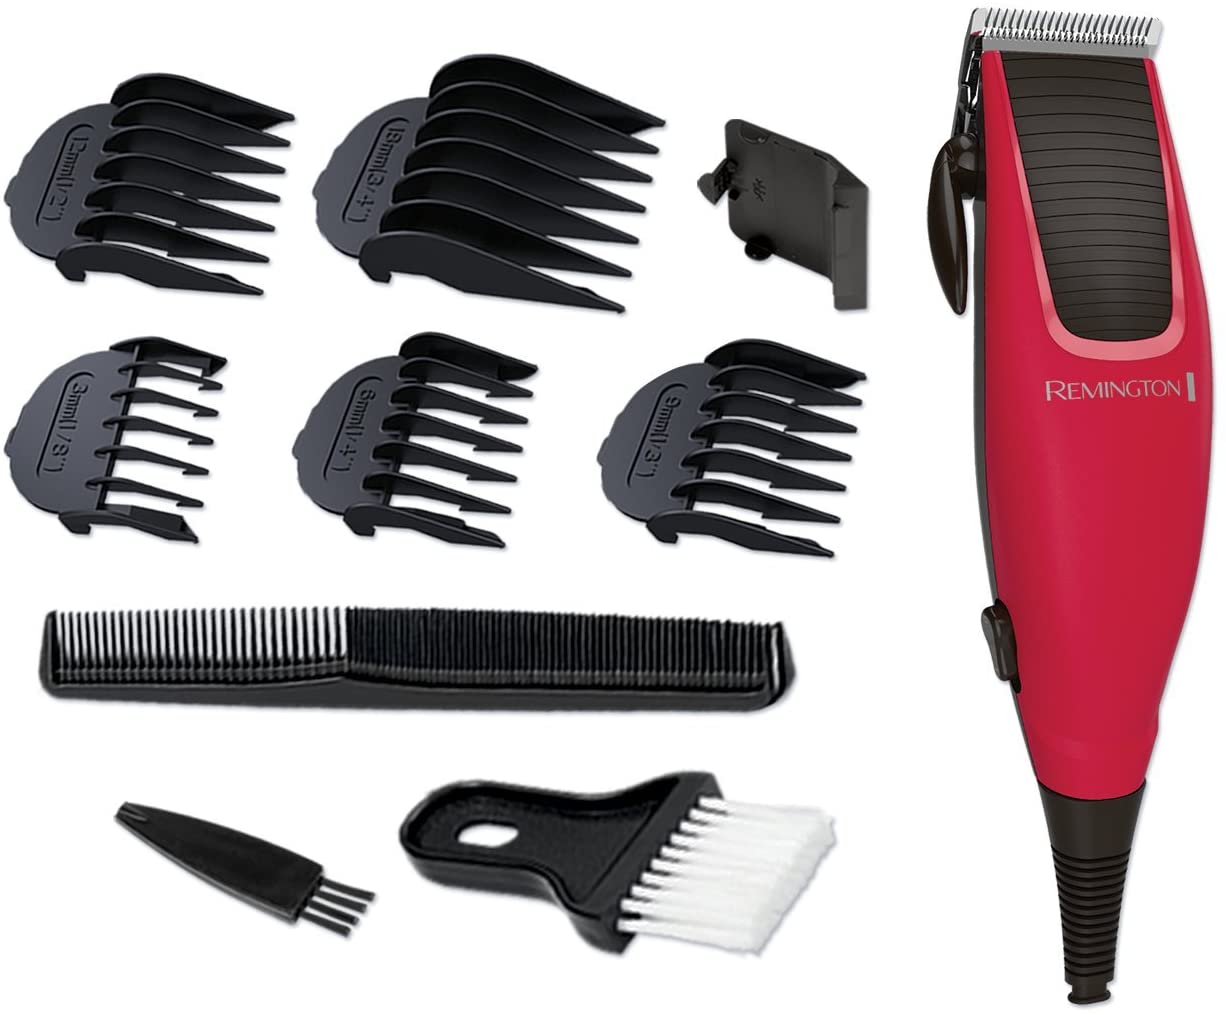 Remington Professional Apprentice Corded Hair Clippers with 5 Comb Clips and Neck Brush - HC5018